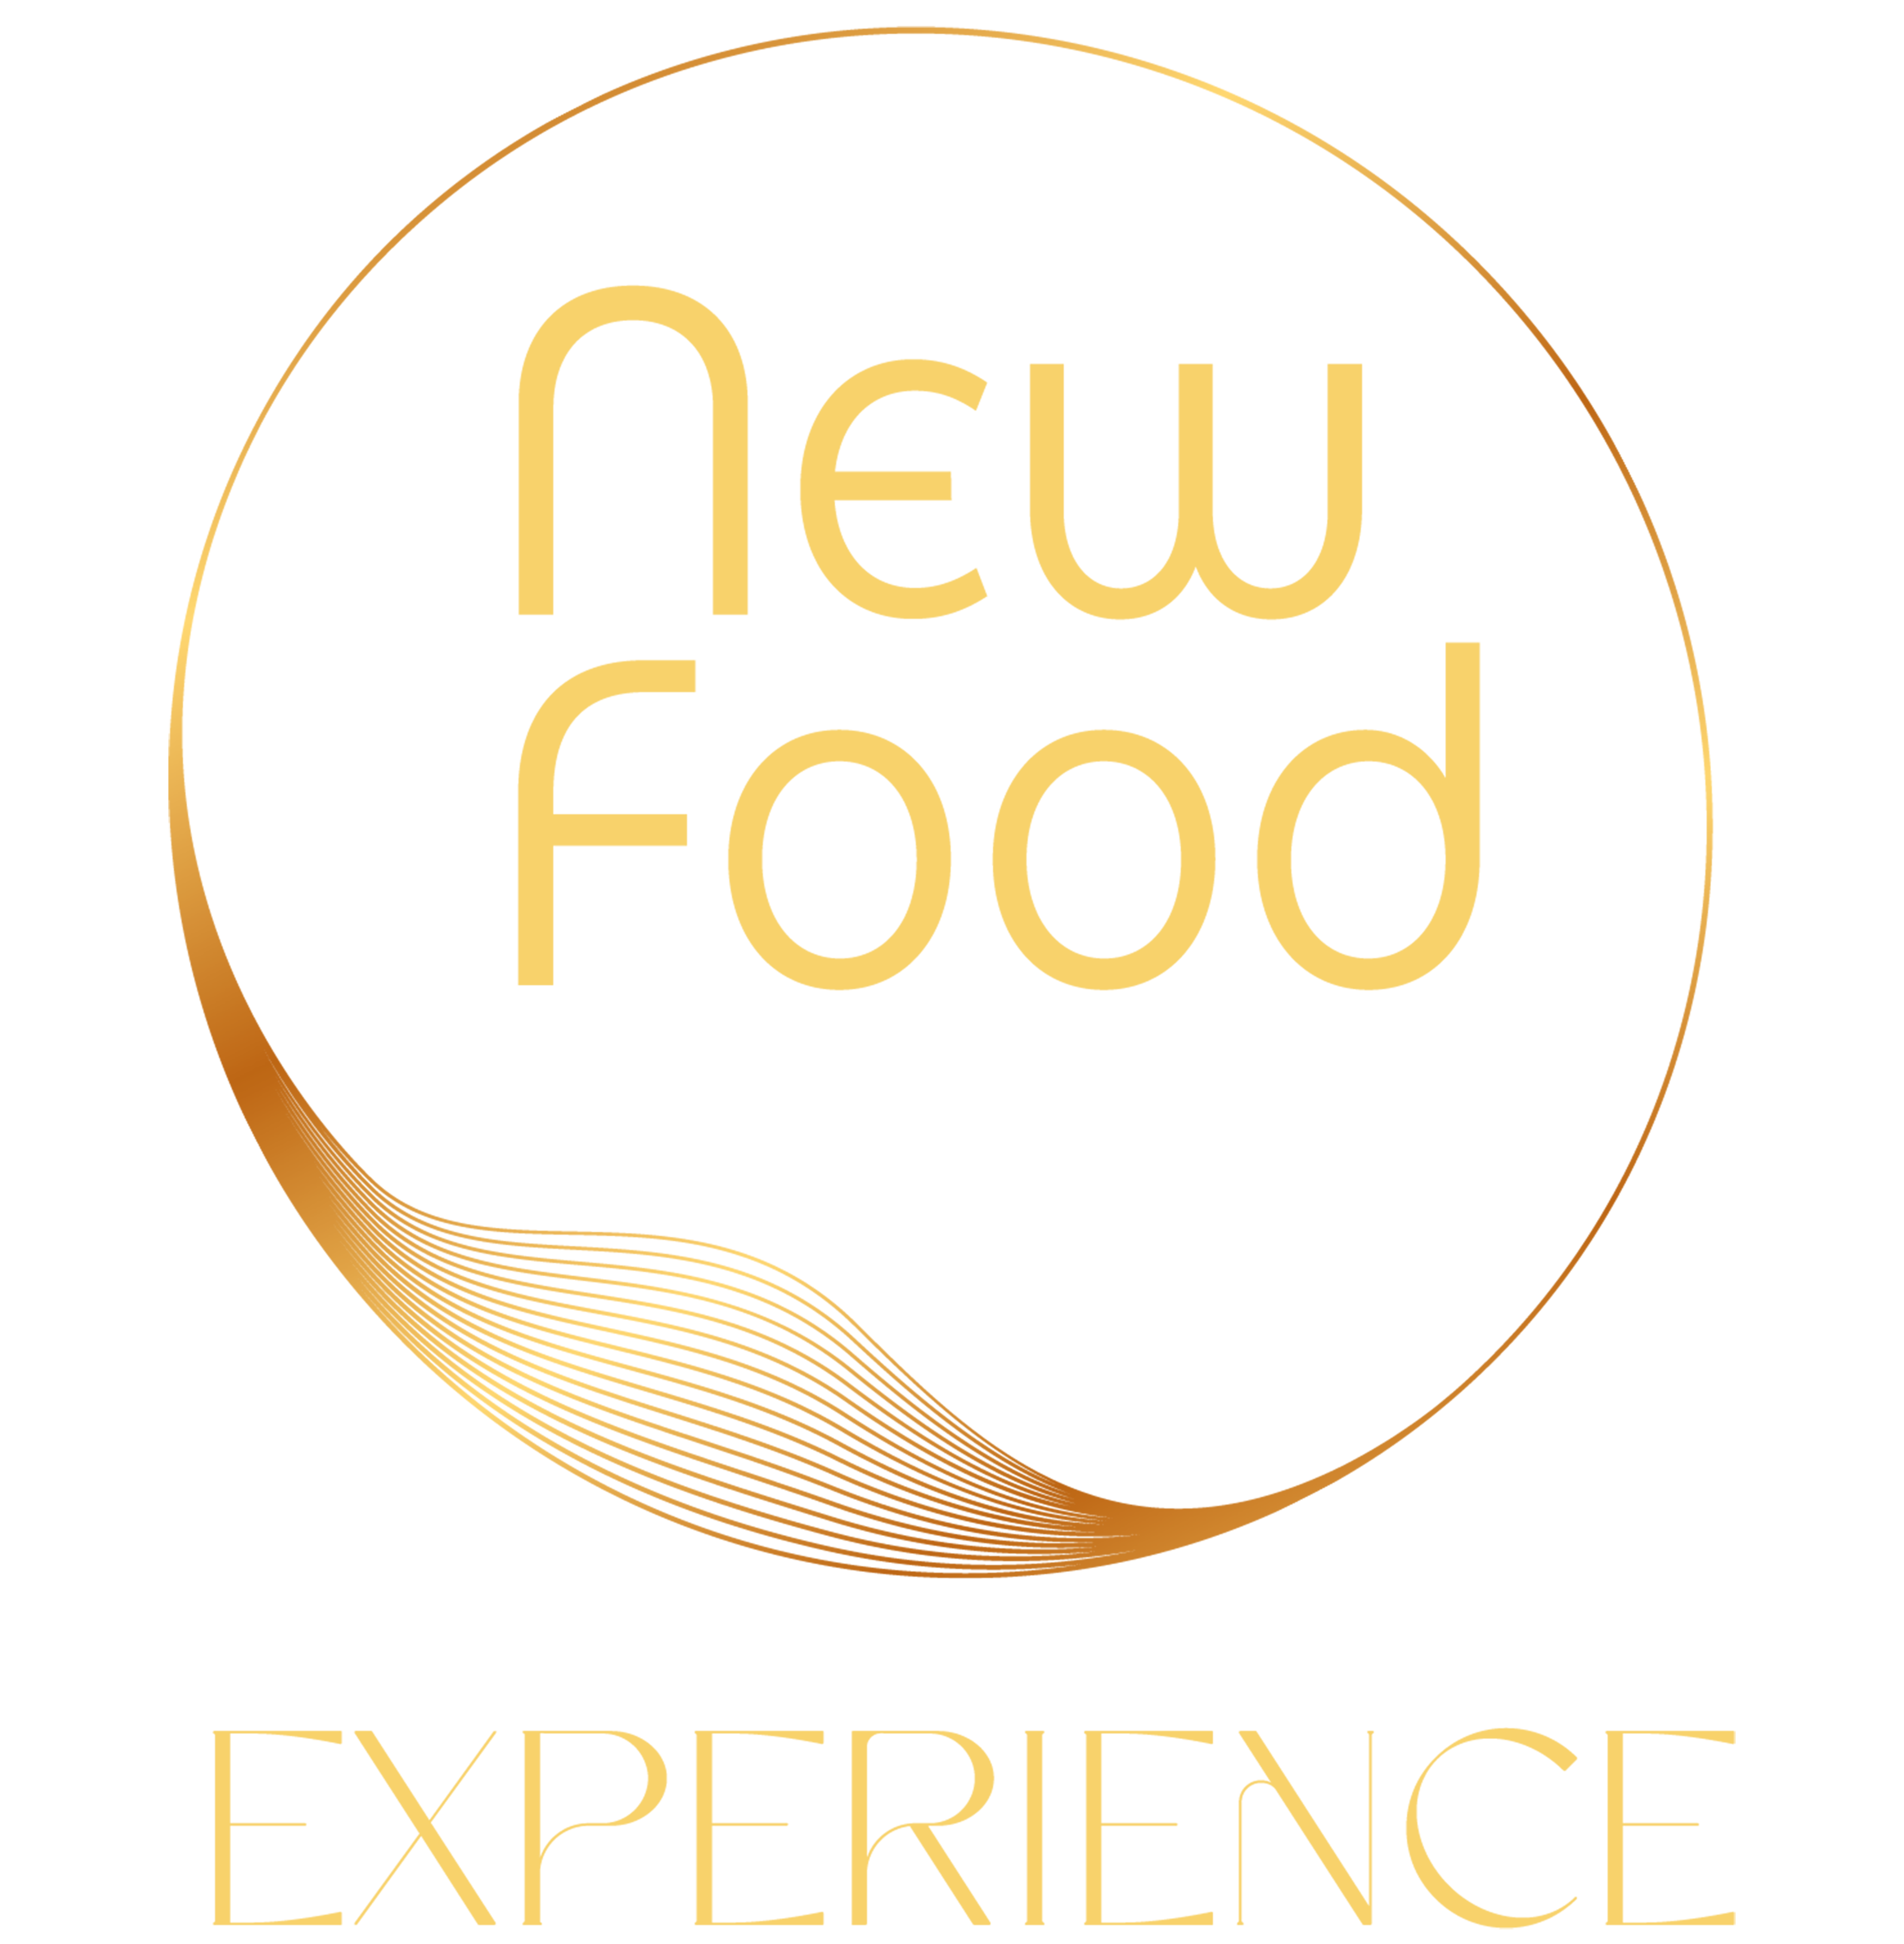 New Food Experience